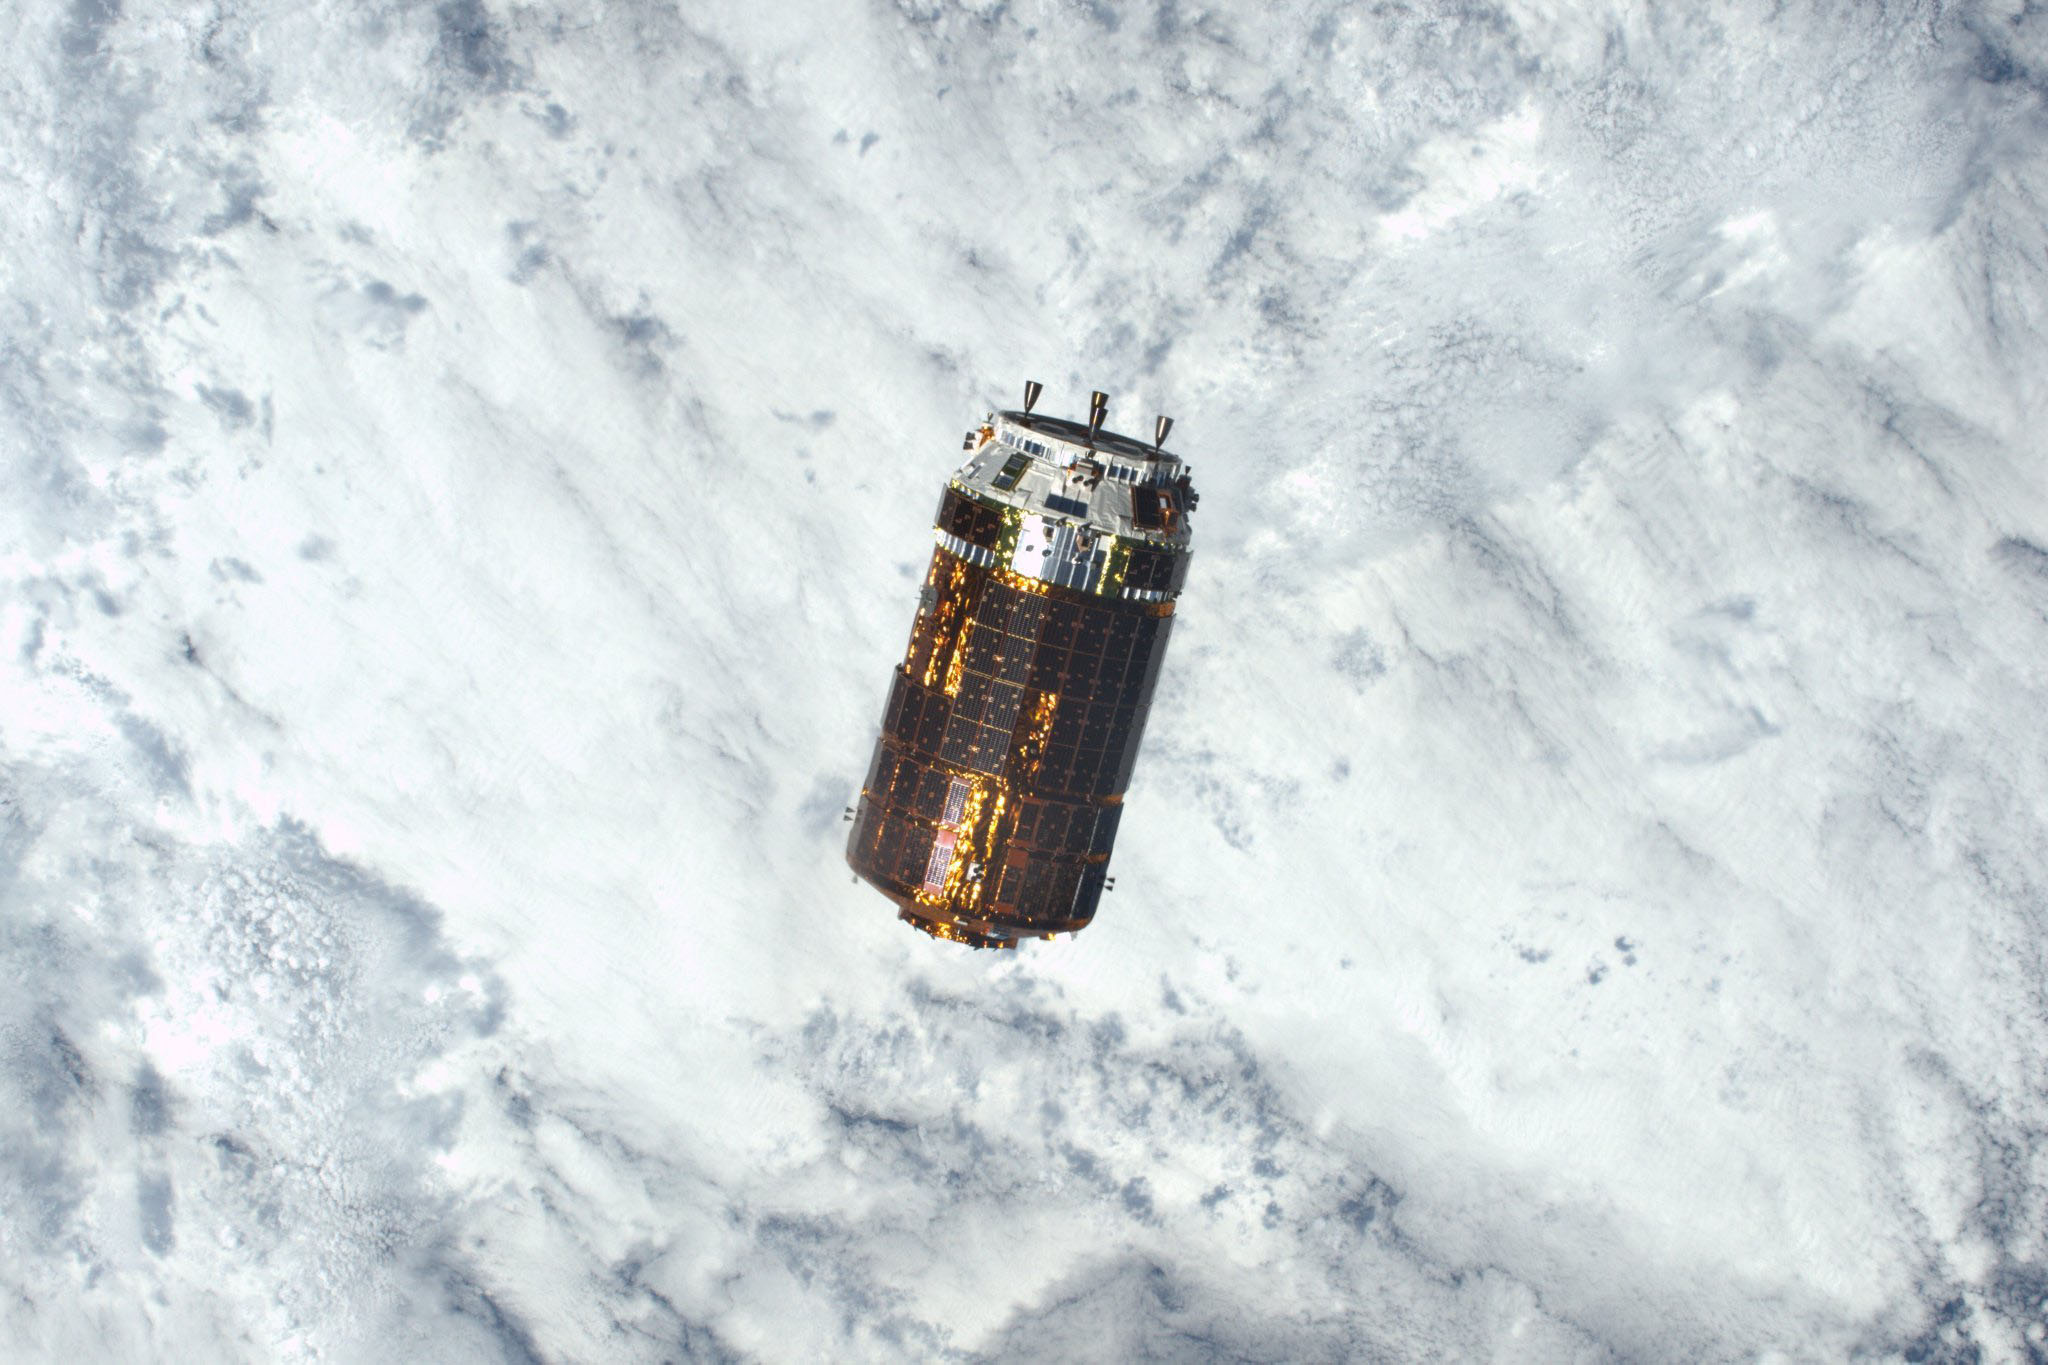 SPACE-US-JAPAThis NASA photo obtained Dec. 14, 2016 shows an image taken by Expedition 50 Commander Shane Kimbrough of NASA of the Japan Aerospace Exploration Agencys Kounotori H-II Transfer Vehicle (HTV-6) as it approached the International Space Station on Dec. 12, 2016.N-KOUNOTORI